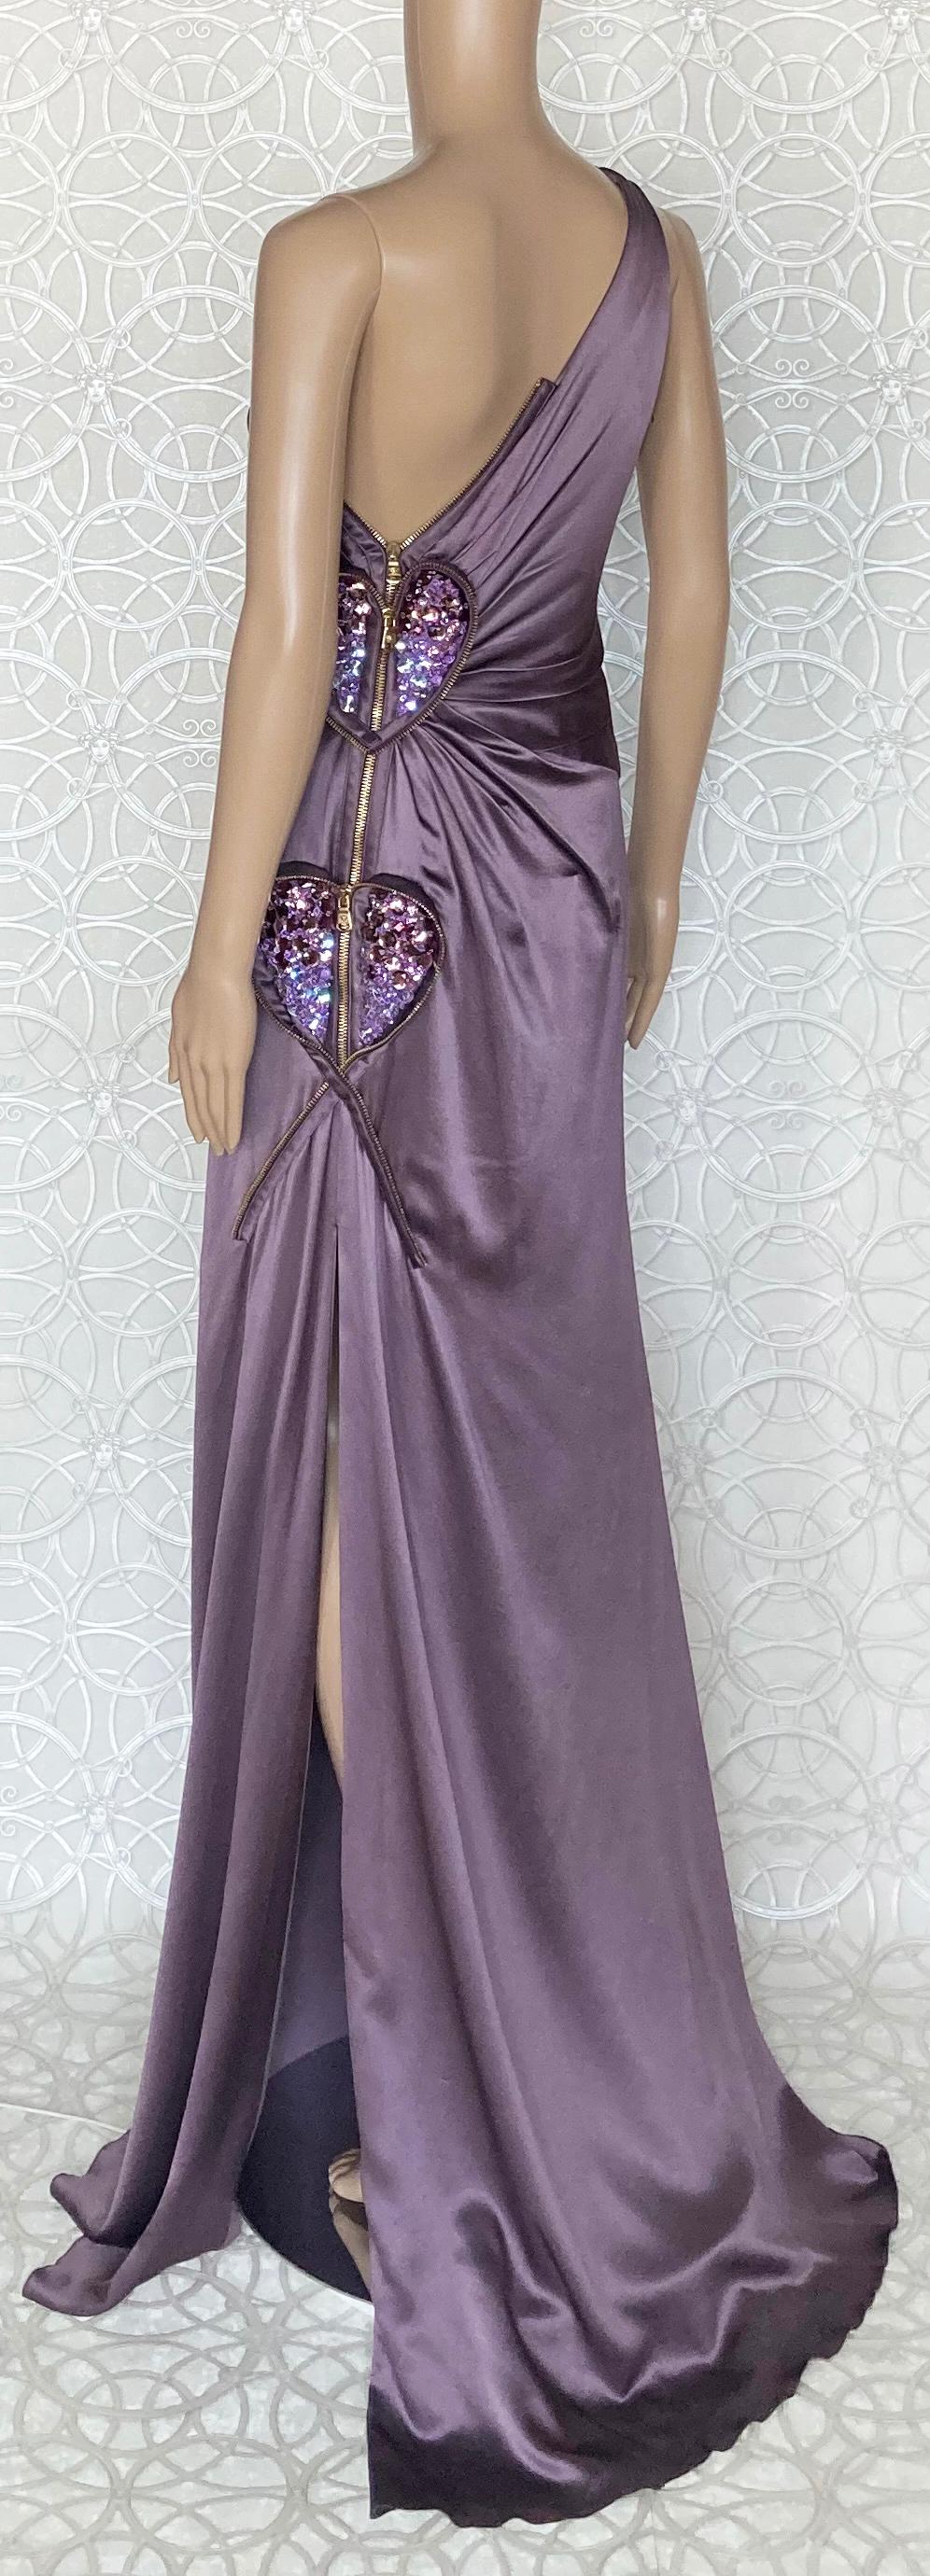 Women's S/S 2009 L# 37 VERSACE ONE SHOULDER PURPLE LONG DRESS GOWN With HEARTS 46 - 10 For Sale